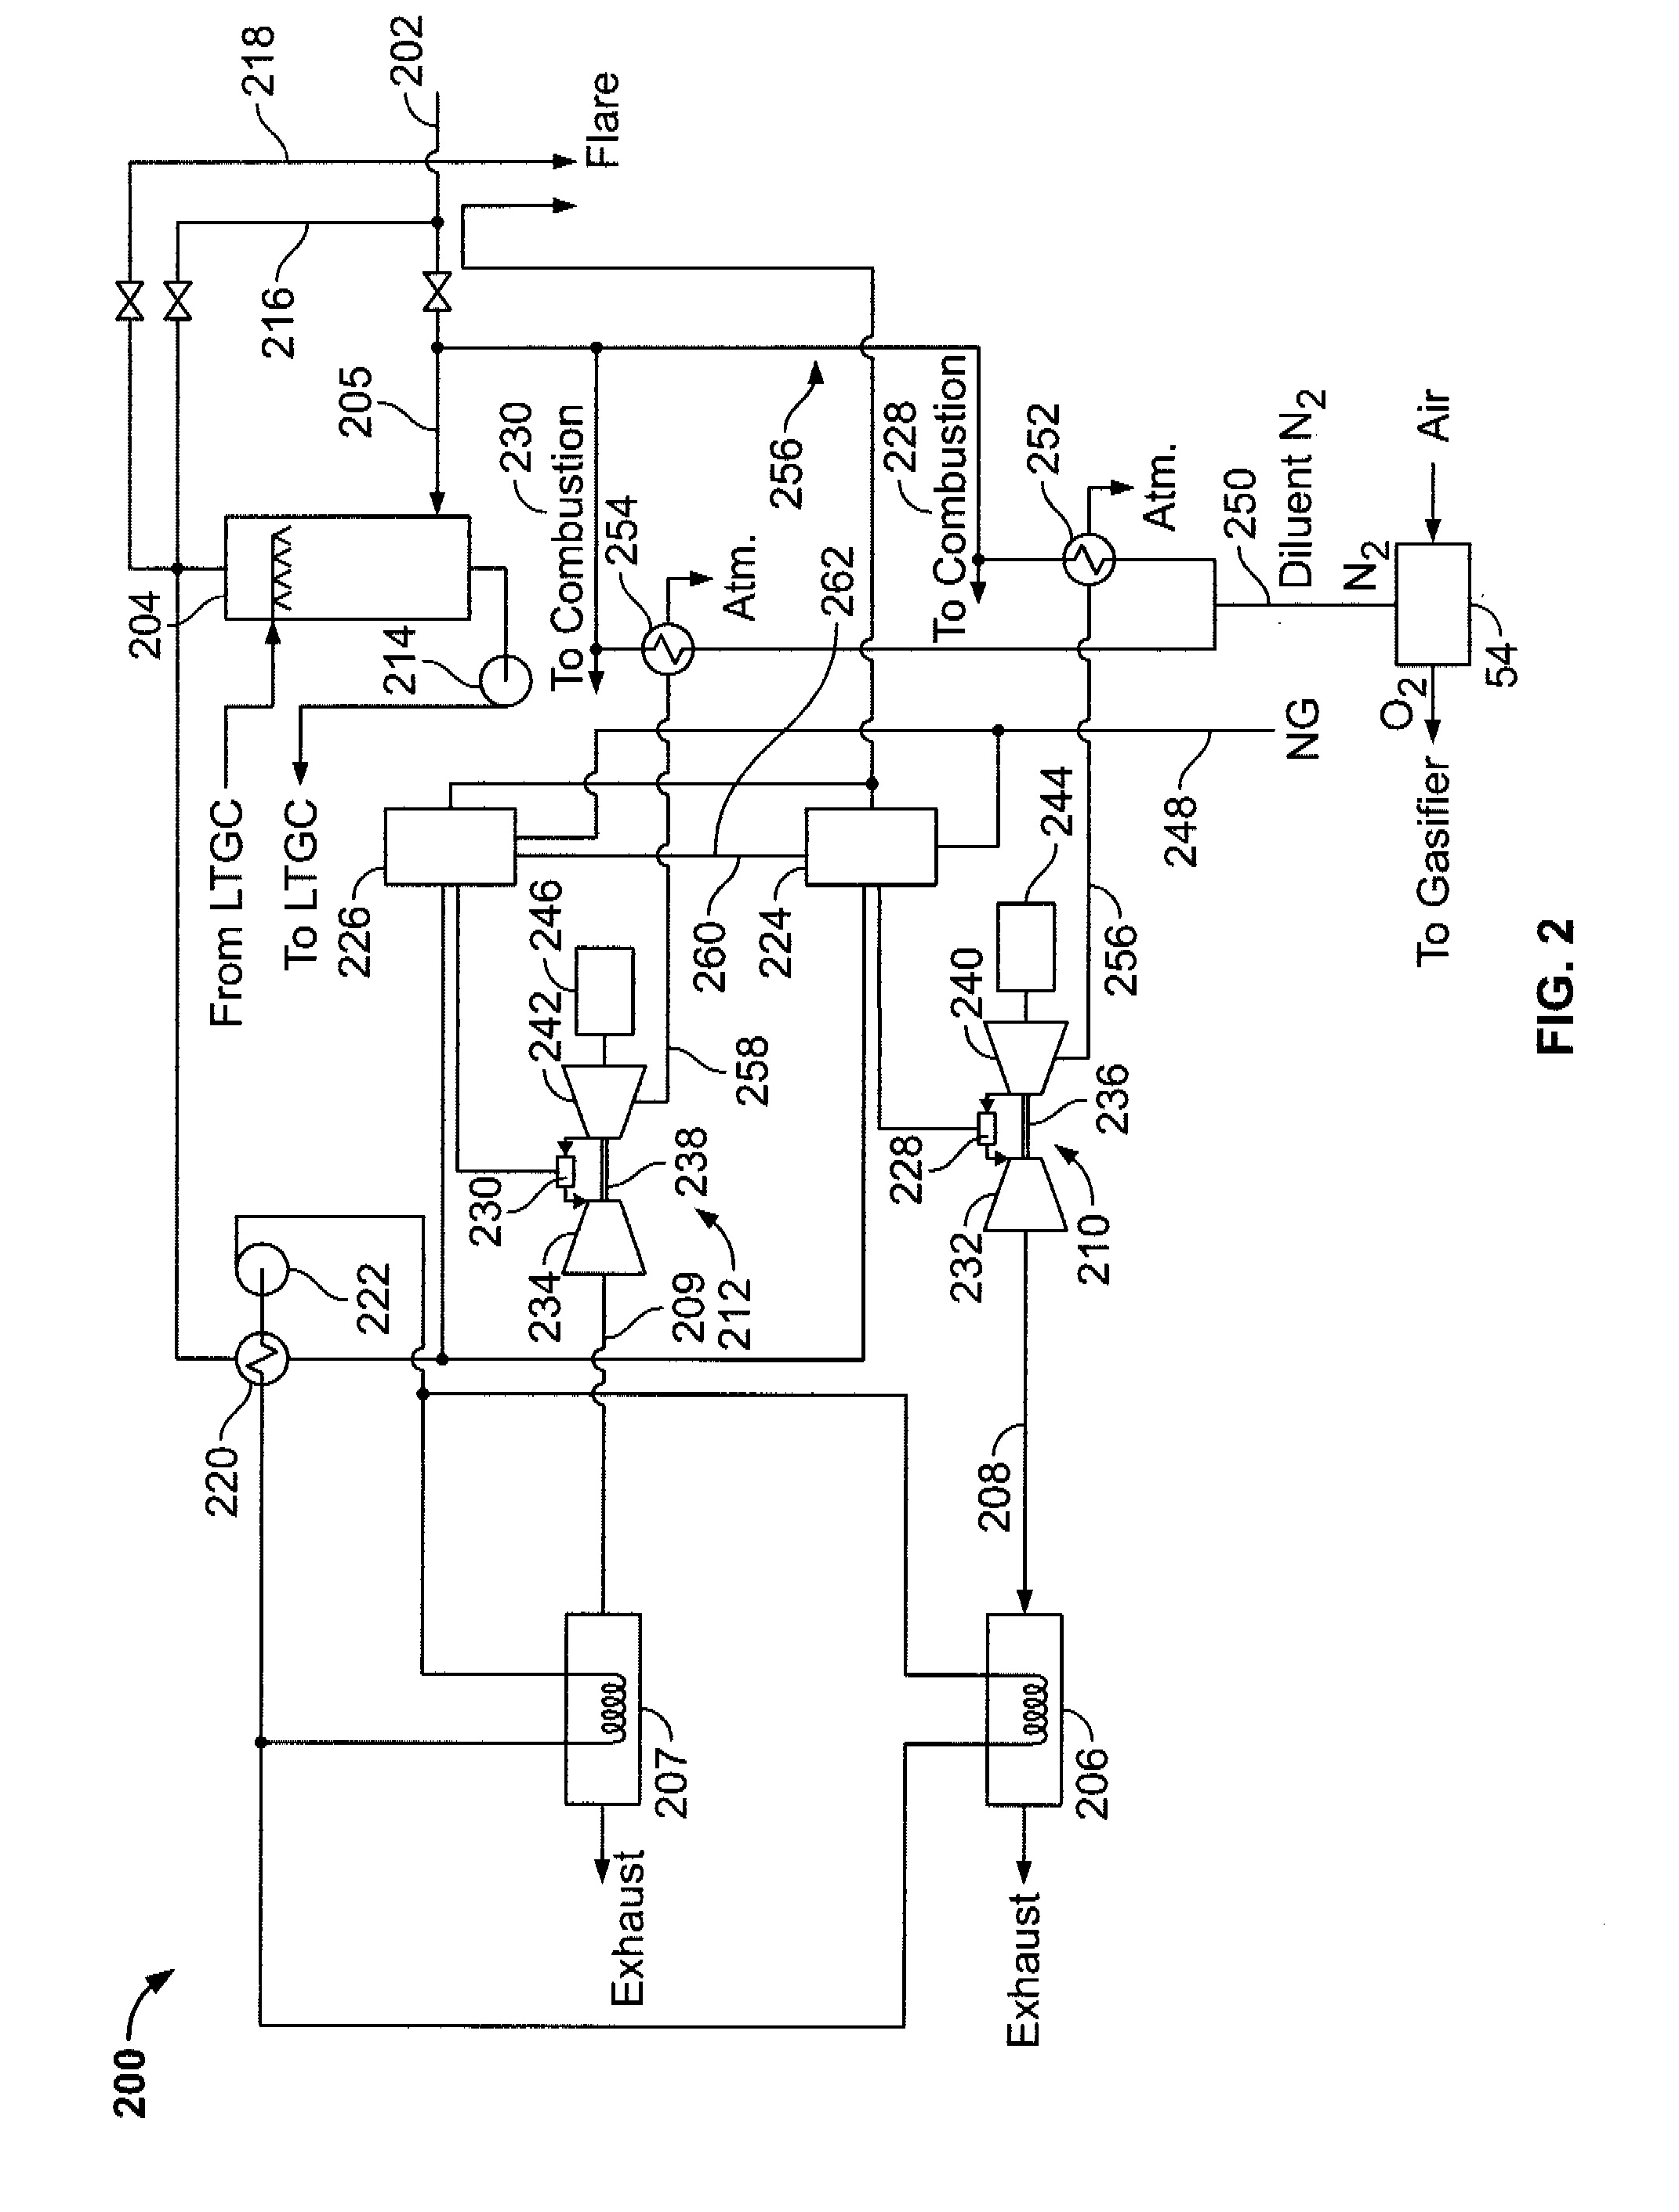 Methods and systems for gas turbine syngas warm-up with low emissions